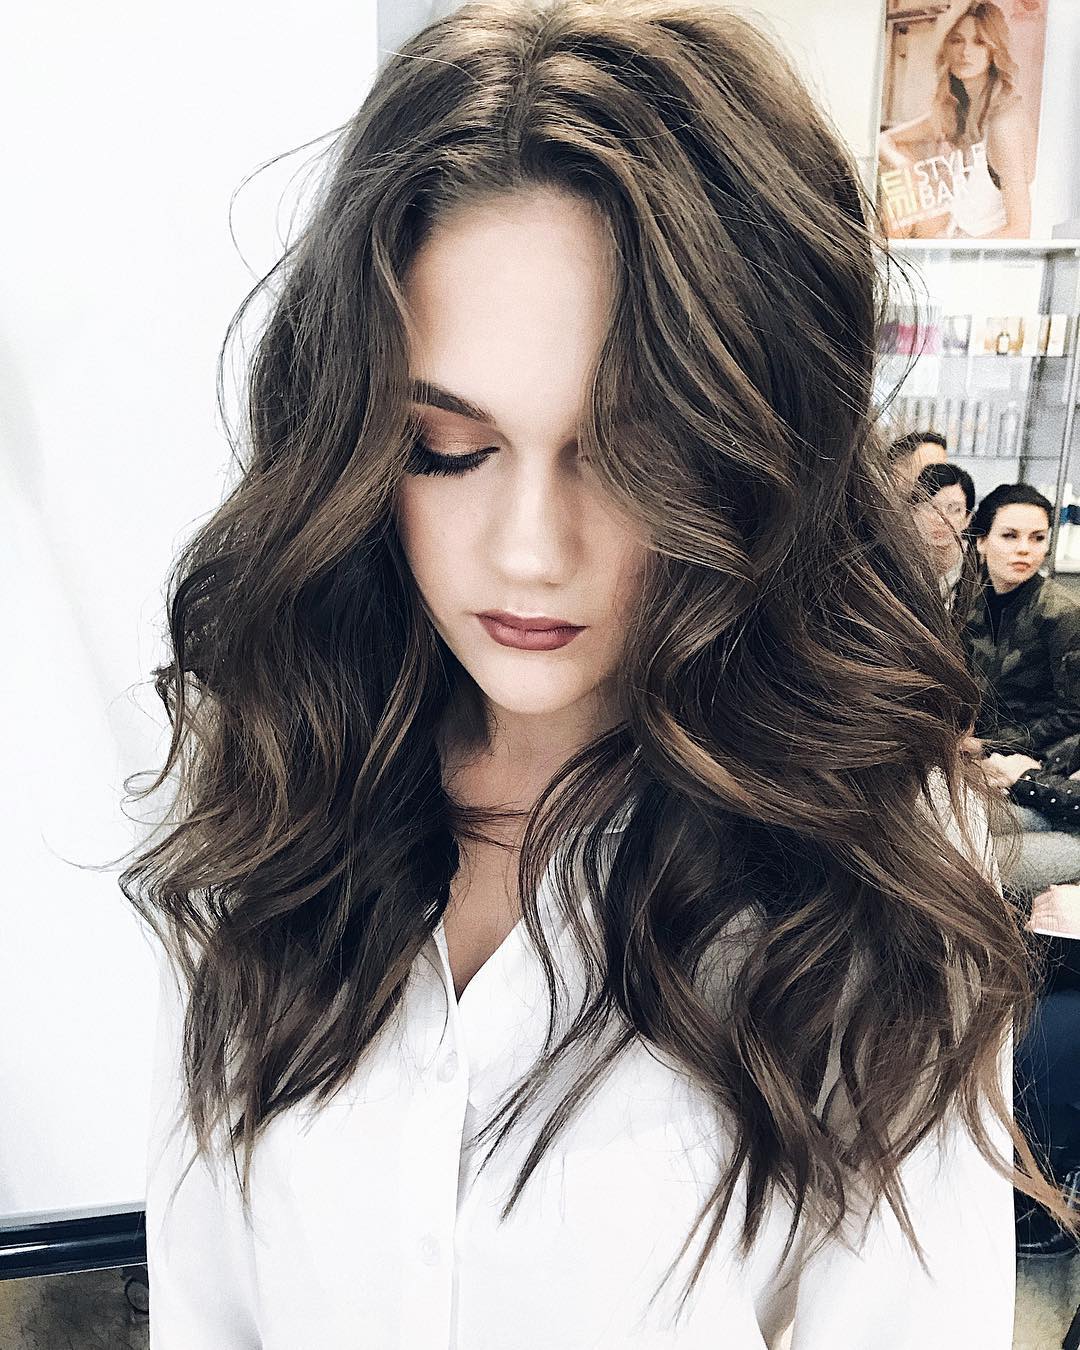 10 gorgeous long wavy perm hairstyles, long hair styles 2019